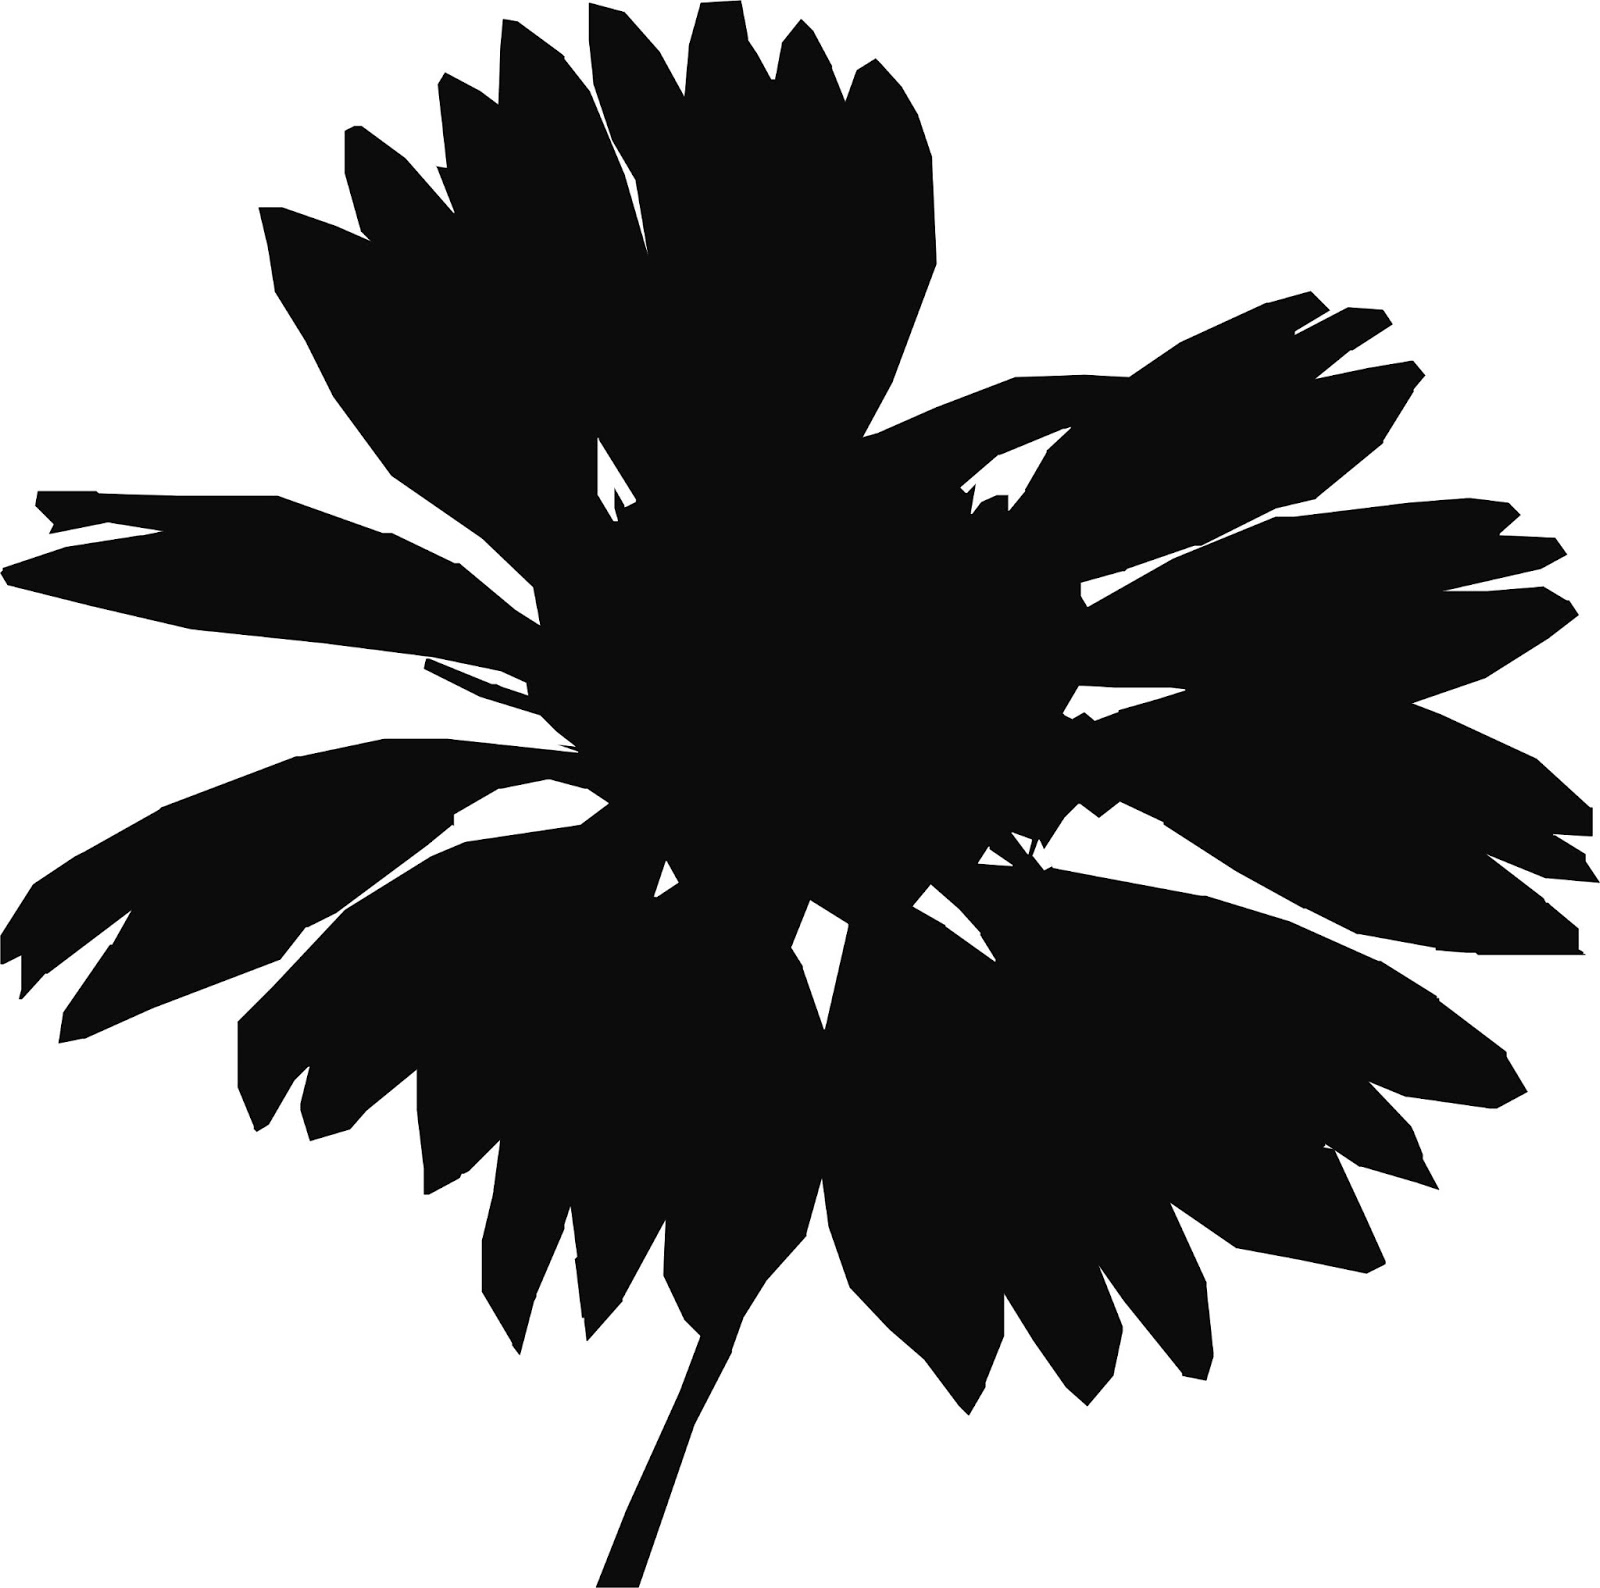 Flower Silhouettes - ClipArt Best